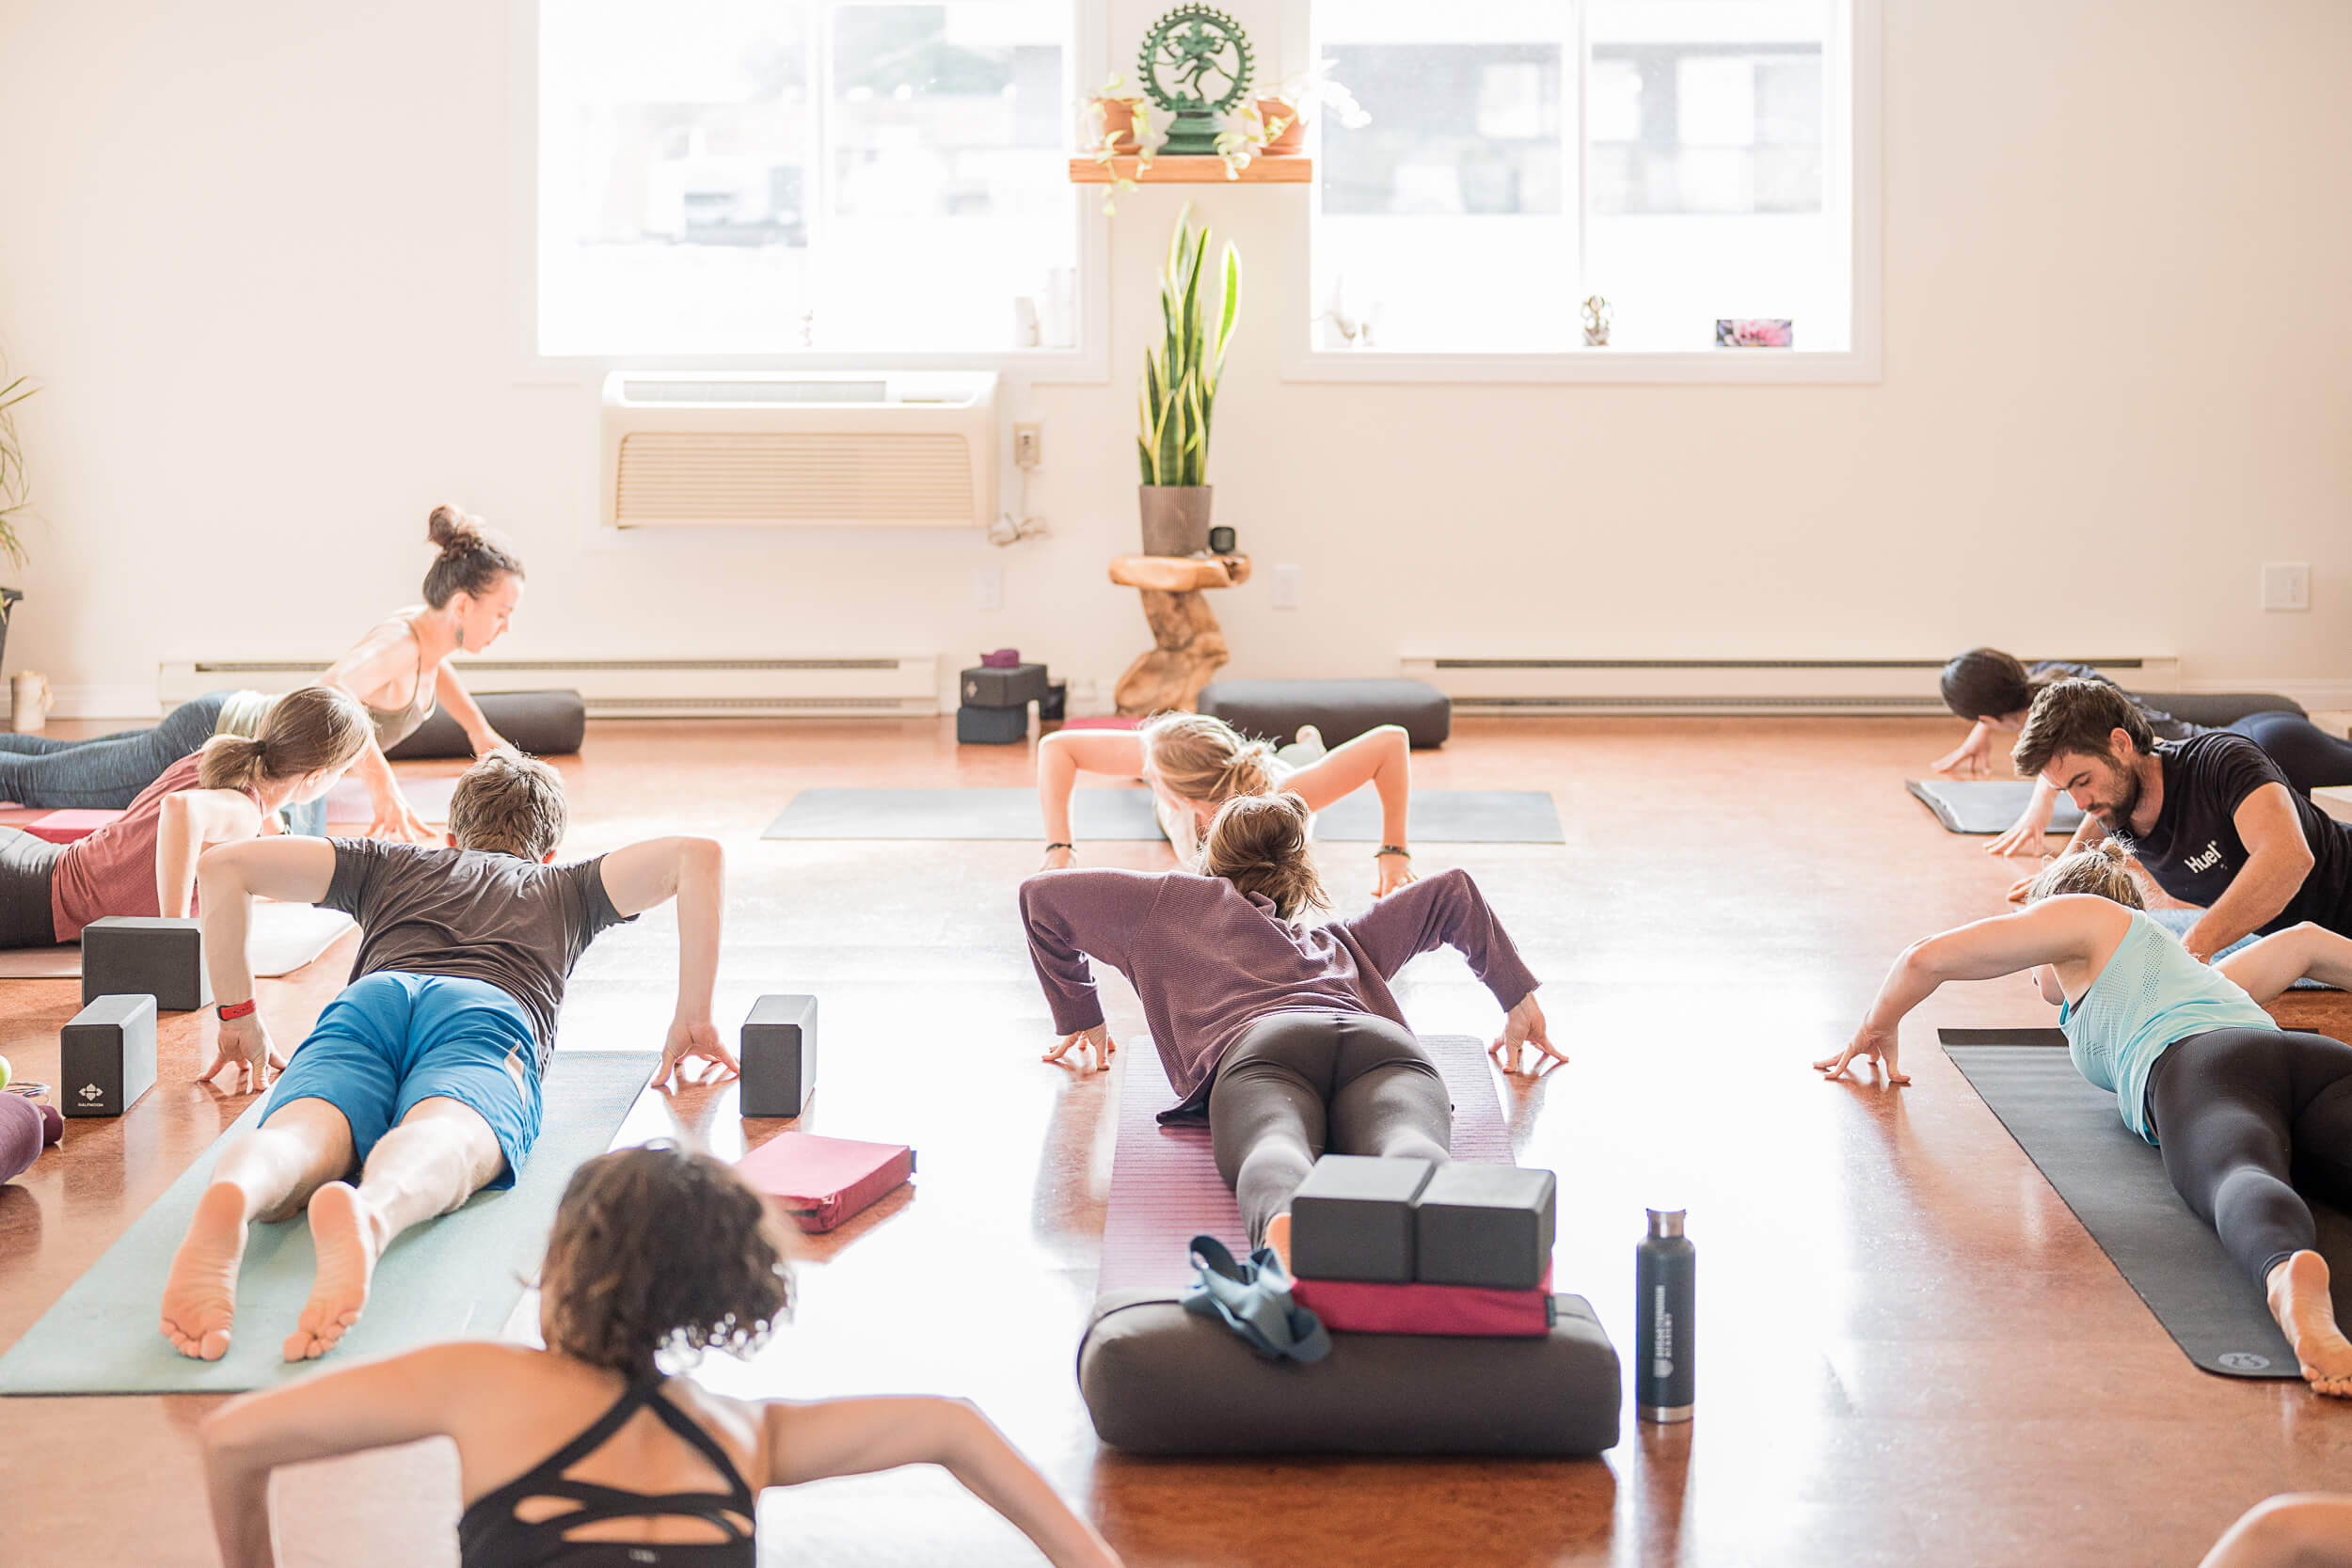 A diverse group of students are immersed in their yoga practice at Shala Yoga in Squamish, stretching in unison in a well-lit studio that exudes calm and collective energy. The variety of poses and props in use reflects the studio's commitment to supporting each individual's unique journey in yoga.